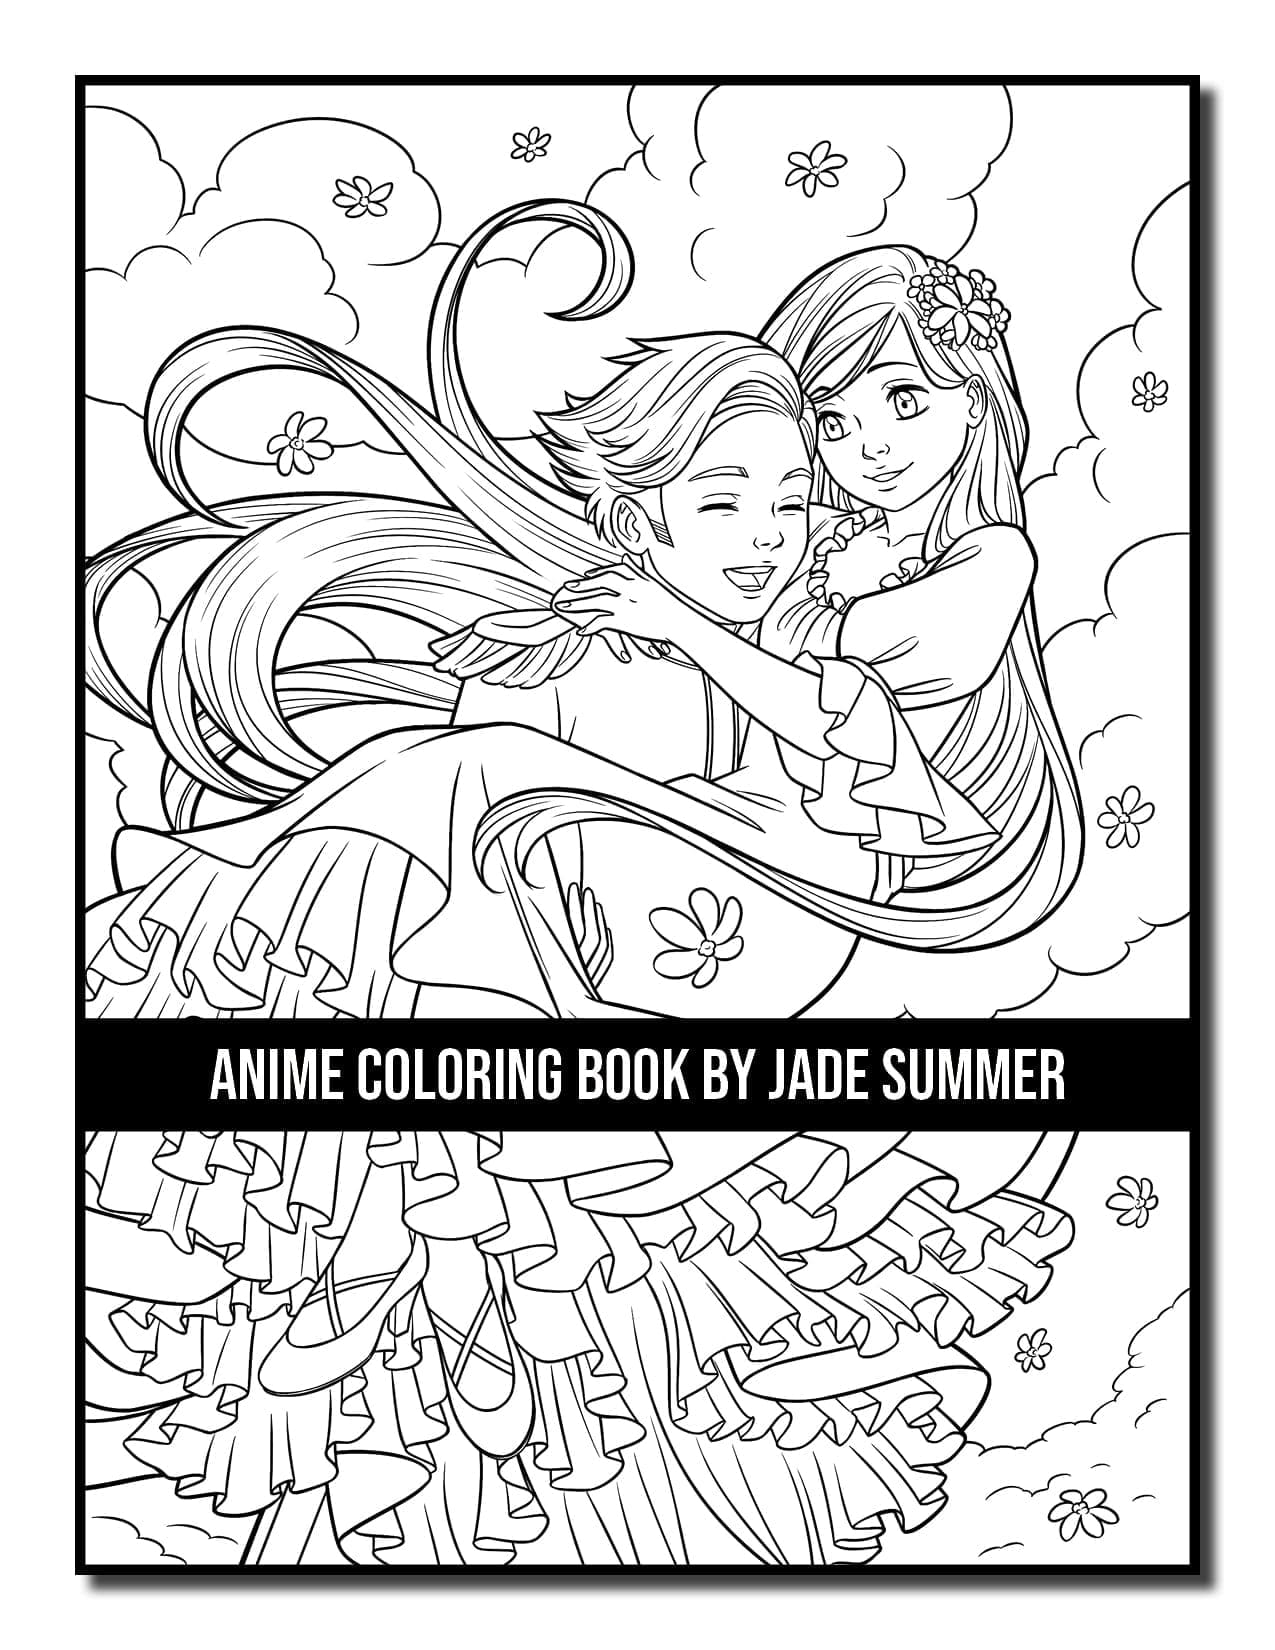 Anime Coloring Book | Jade Summer